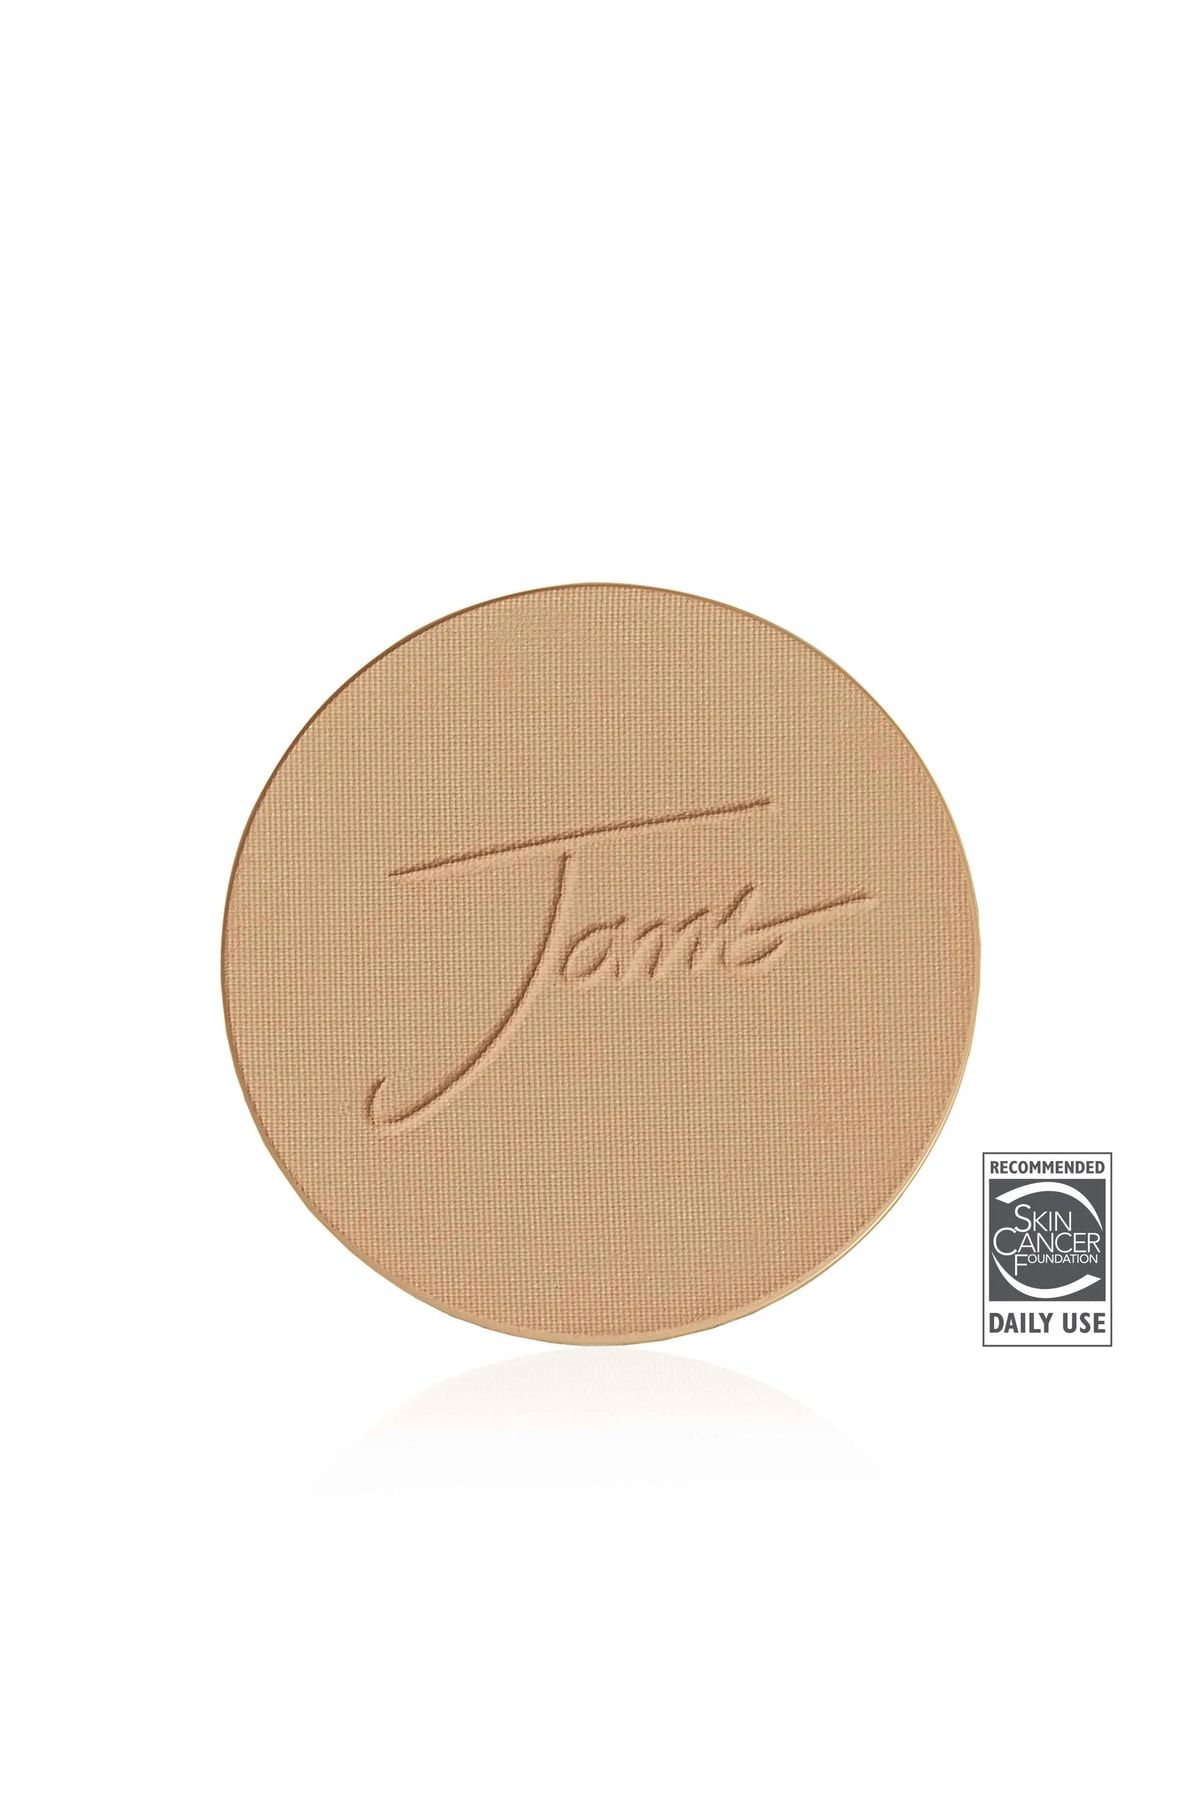 Jane Iredale Purepressed® Base Mineral Foundation Spf 20 Refill - Latte